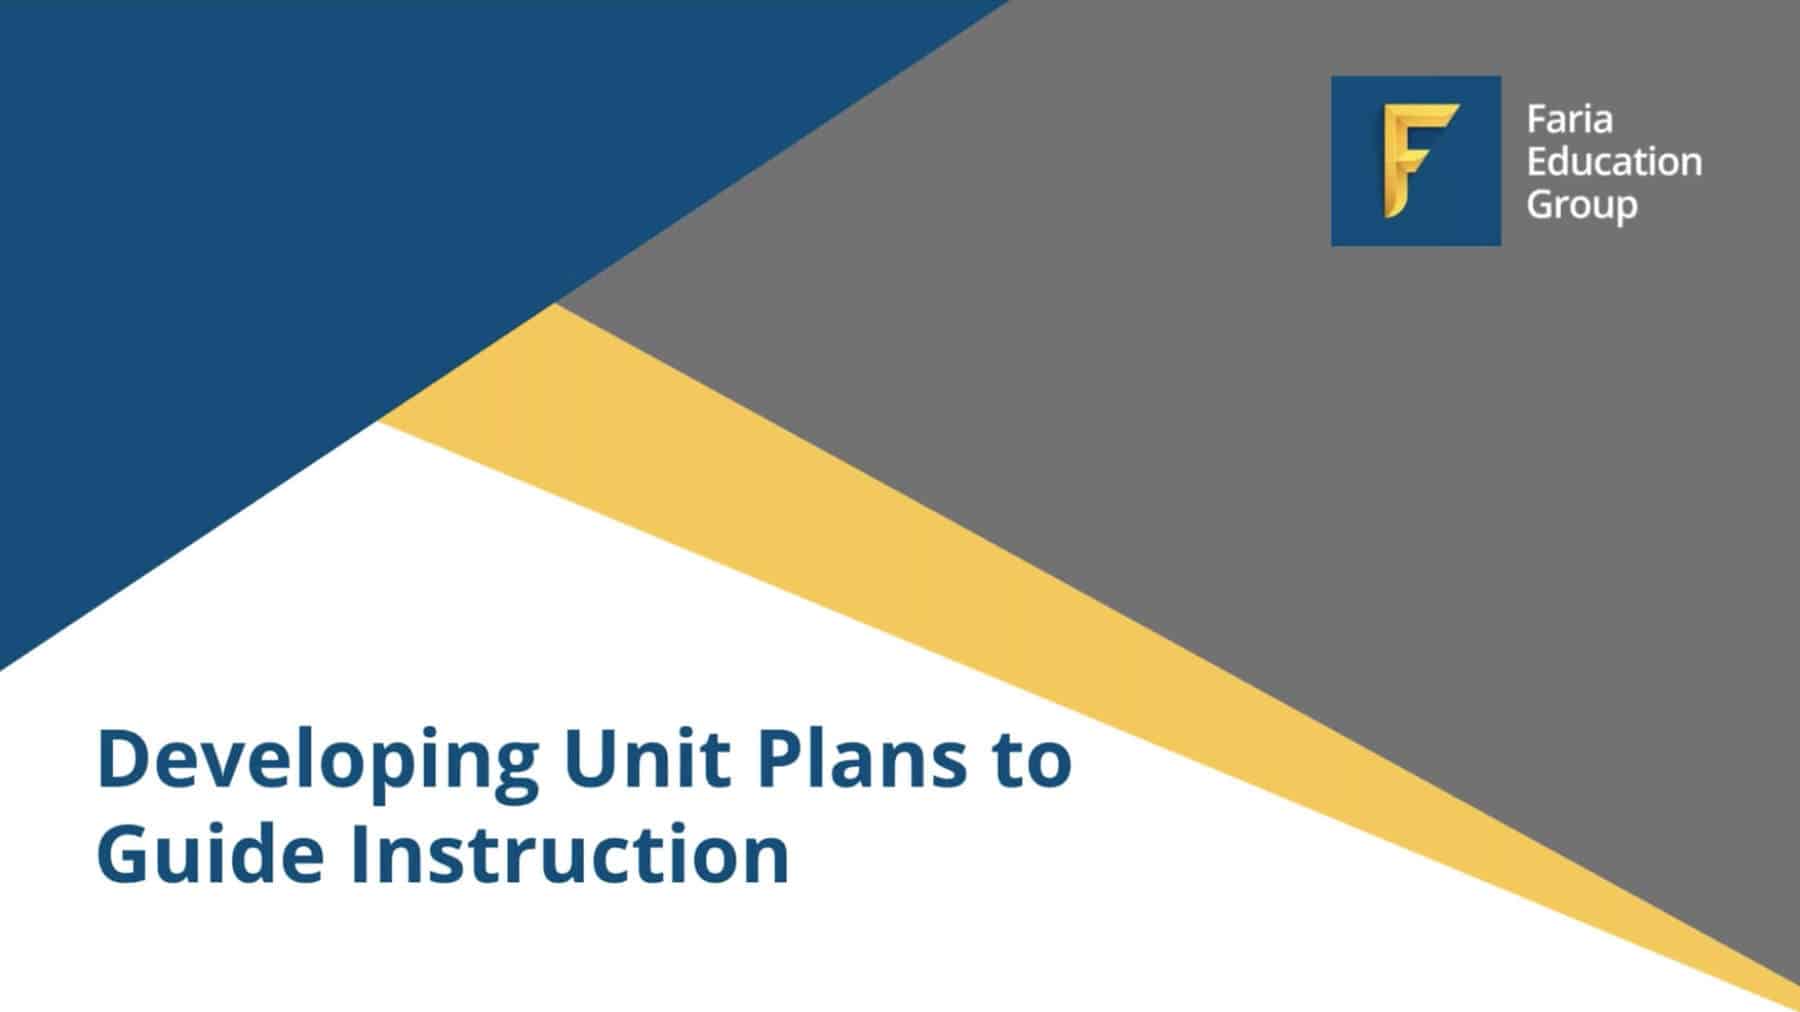 Developing Unit Plans to Guide Instruction